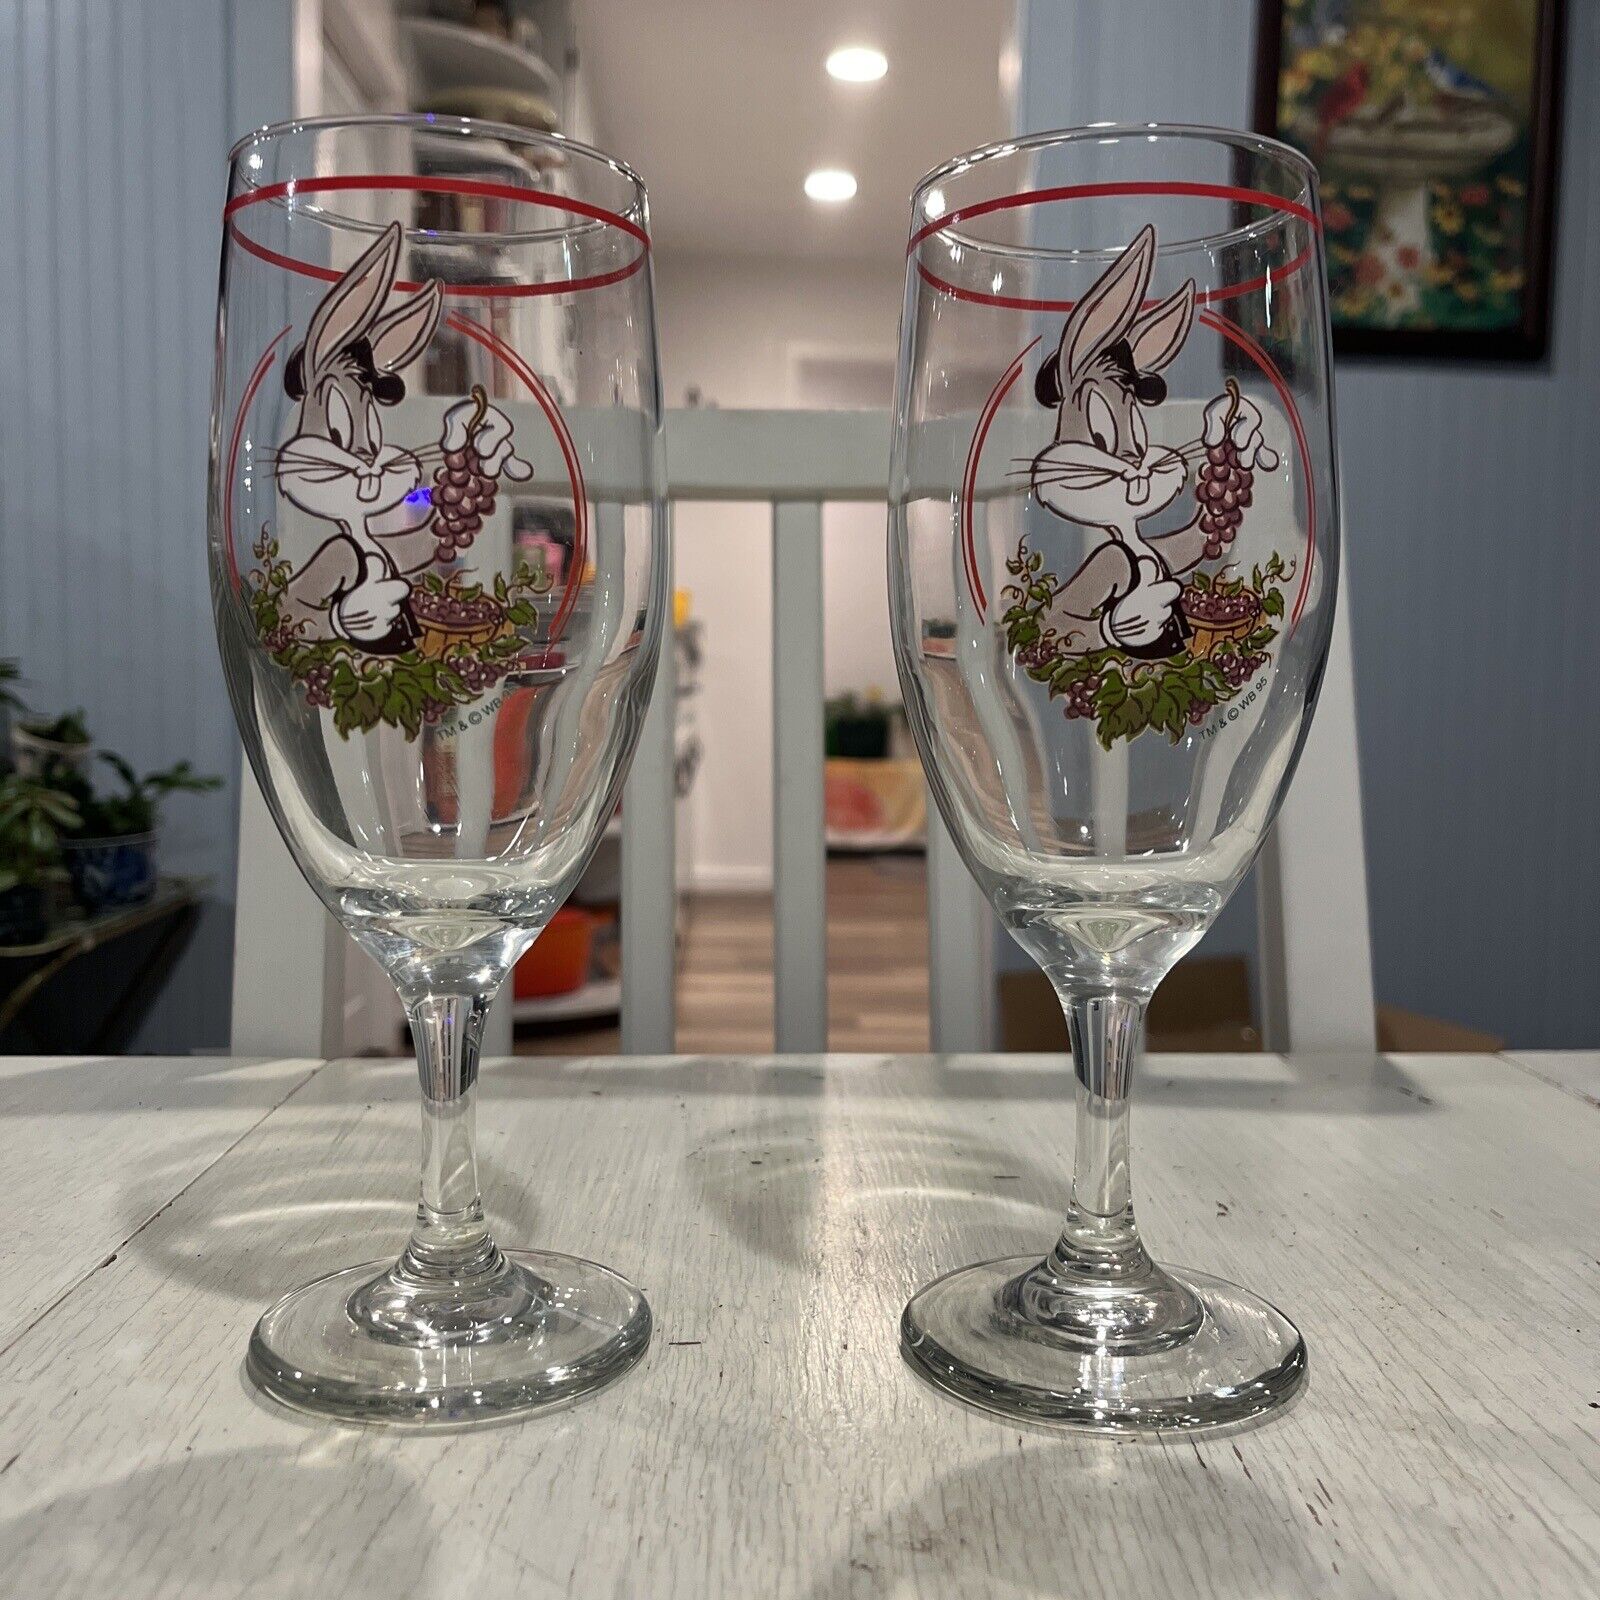 Pair of Vintage 1995 Looney Tunes Bugs Bunny With Grapes Stemmed Wine Glasses WB